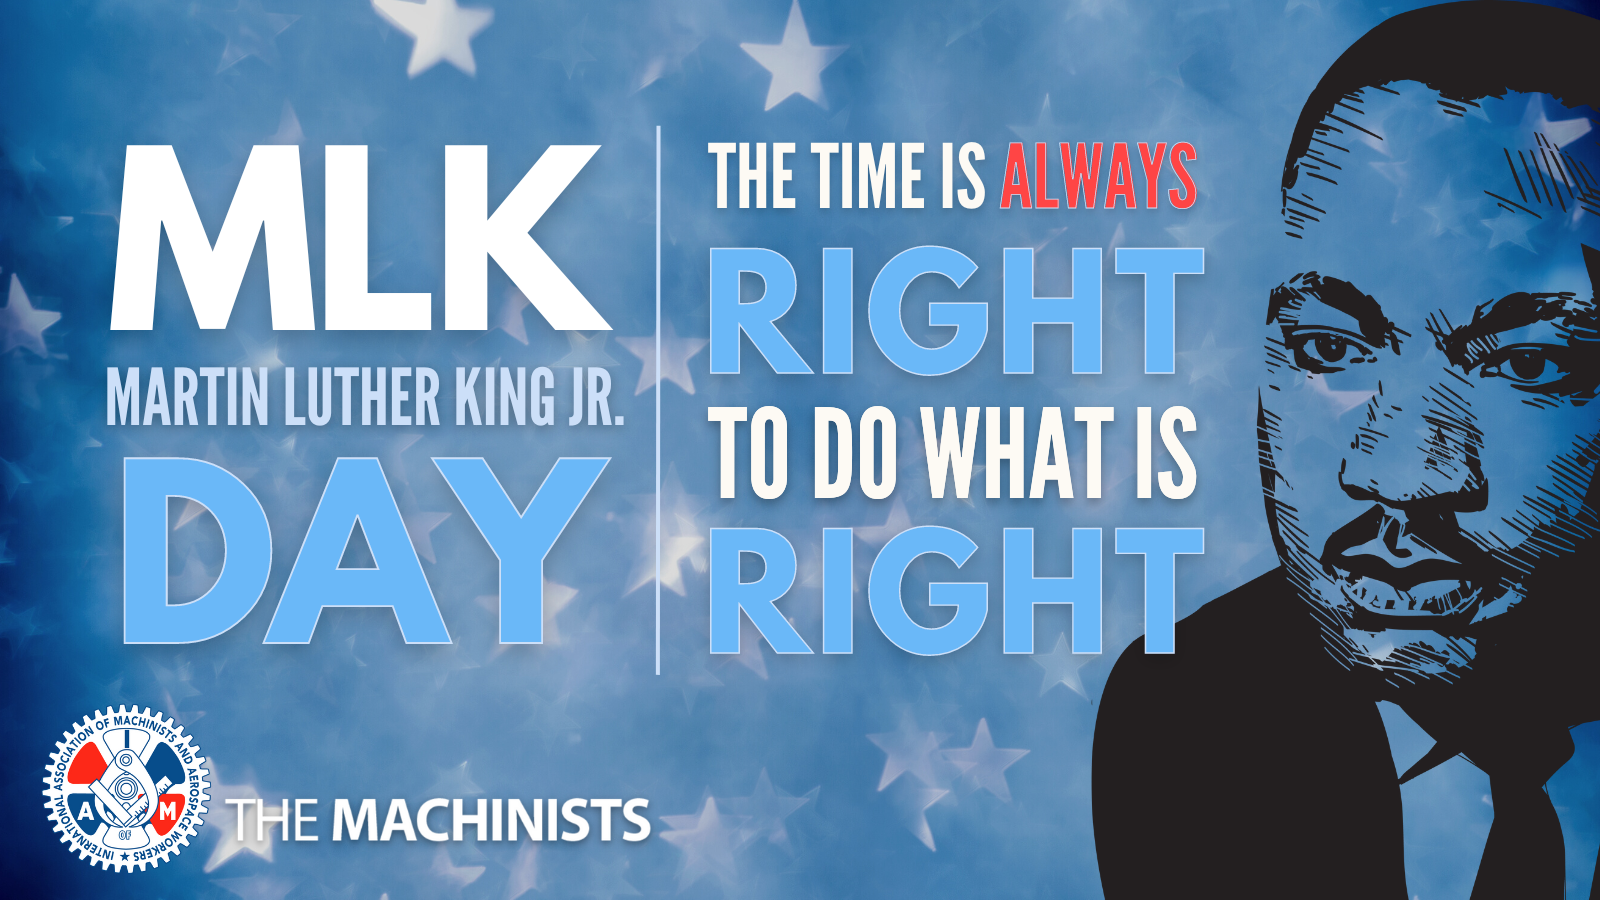 Dr. King’s Principles Inspire Us to Be Better